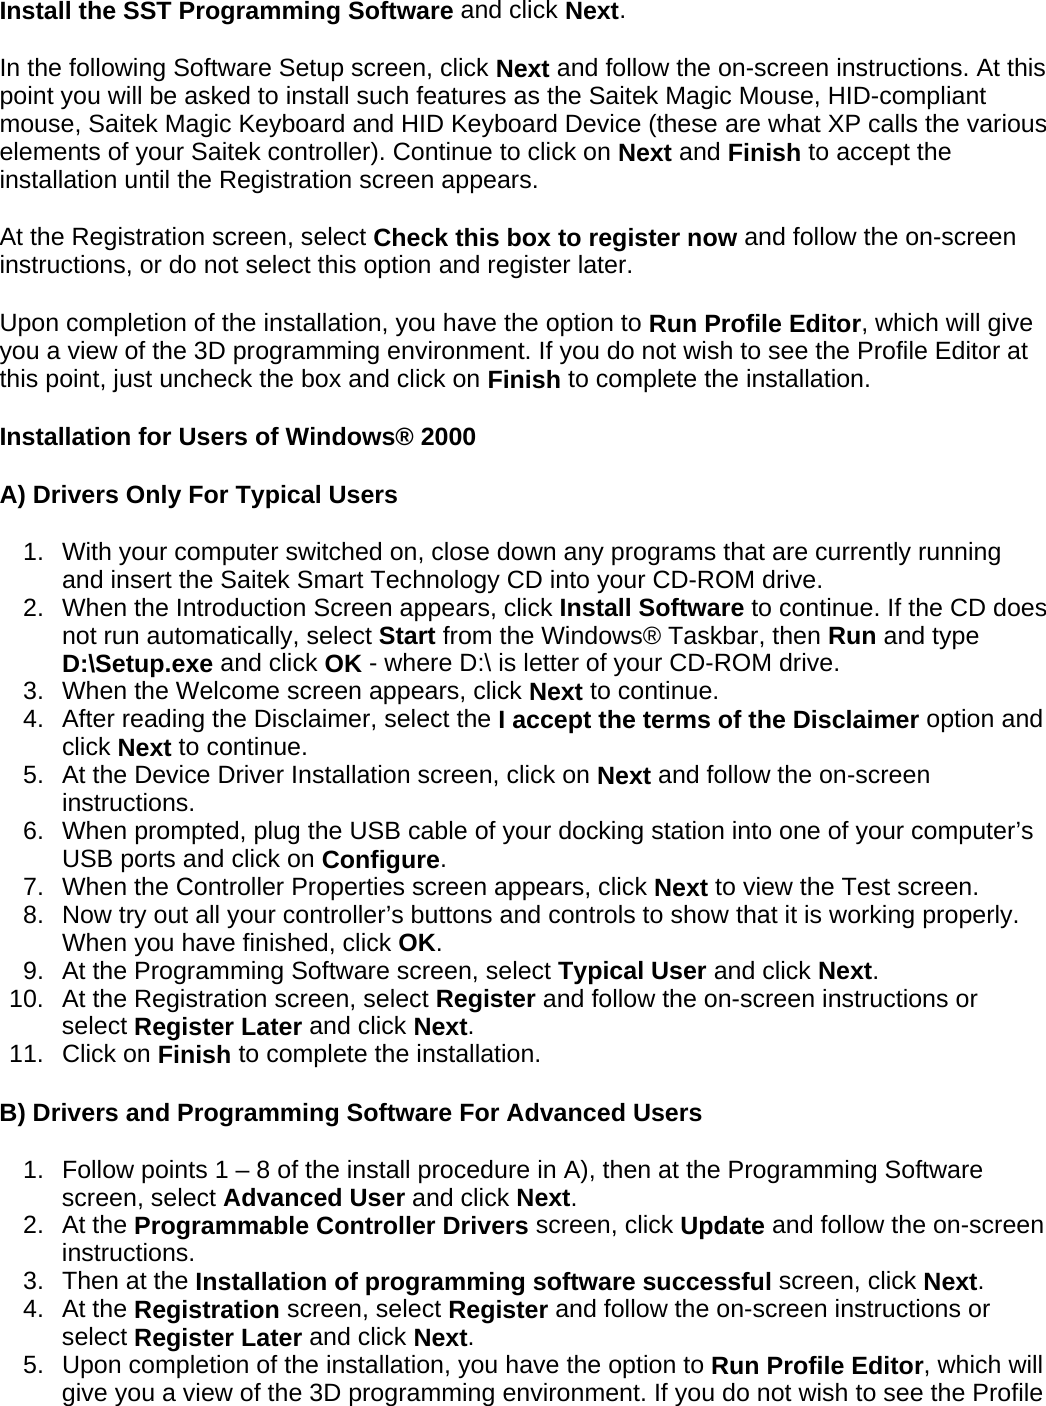 Install the SST Programming Software and click Next.  In the following Software Setup screen, click Next and follow the on-screen instructions. At this point you will be asked to install such features as the Saitek Magic Mouse, HID-compliant mouse, Saitek Magic Keyboard and HID Keyboard Device (these are what XP calls the various elements of your Saitek controller). Continue to click on Next and Finish to accept the installation until the Registration screen appears.  At the Registration screen, select Check this box to register now and follow the on-screen instructions, or do not select this option and register later.  Upon completion of the installation, you have the option to Run Profile Editor, which will give you a view of the 3D programming environment. If you do not wish to see the Profile Editor at this point, just uncheck the box and click on Finish to complete the installation.  Installation for Users of Windows® 2000  A) Drivers Only For Typical Users  1. With your computer switched on, close down any programs that are currently running and insert the Saitek Smart Technology CD into your CD-ROM drive.  2. When the Introduction Screen appears, click Install Software to continue. If the CD does not run automatically, select Start from the Windows® Taskbar, then Run and type D:\Setup.exe and click OK - where D:\ is letter of your CD-ROM drive.  3. When the Welcome screen appears, click Next to continue.  4. After reading the Disclaimer, select the I accept the terms of the Disclaimer option and click Next to continue.  5. At the Device Driver Installation screen, click on Next and follow the on-screen instructions.  6. When prompted, plug the USB cable of your docking station into one of your computer’s USB ports and click on Configure.  7. When the Controller Properties screen appears, click Next to view the Test screen.  8. Now try out all your controller’s buttons and controls to show that it is working properly. When you have finished, click OK.  9. At the Programming Software screen, select Typical User and click Next.  10. At the Registration screen, select Register and follow the on-screen instructions or select Register Later and click Next.  11. Click on Finish to complete the installation.  B) Drivers and Programming Software For Advanced Users  1. Follow points 1 – 8 of the install procedure in A), then at the Programming Software screen, select Advanced User and click Next.  2. At the Programmable Controller Drivers screen, click Update and follow the on-screen instructions.  3. Then at the Installation of programming software successful screen, click Next.  4. At the Registration screen, select Register and follow the on-screen instructions or select Register Later and click Next.  5. Upon completion of the installation, you have the option to Run Profile Editor, which will give you a view of the 3D programming environment. If you do not wish to see the Profile 